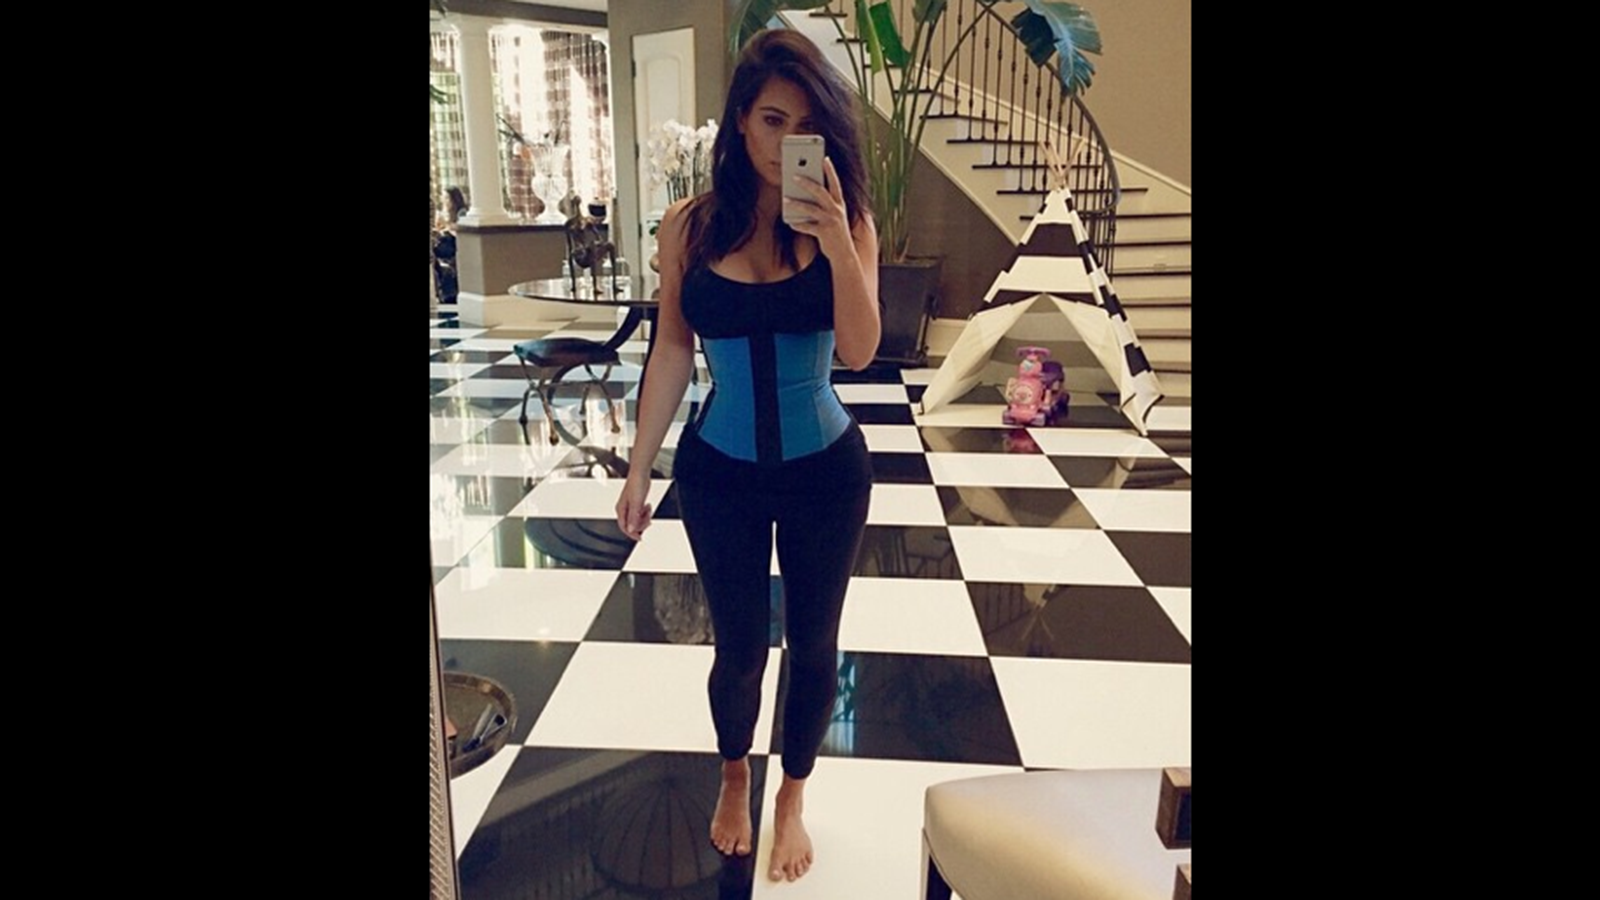 THE CORSET DIET: Weighing the Pros & Cons